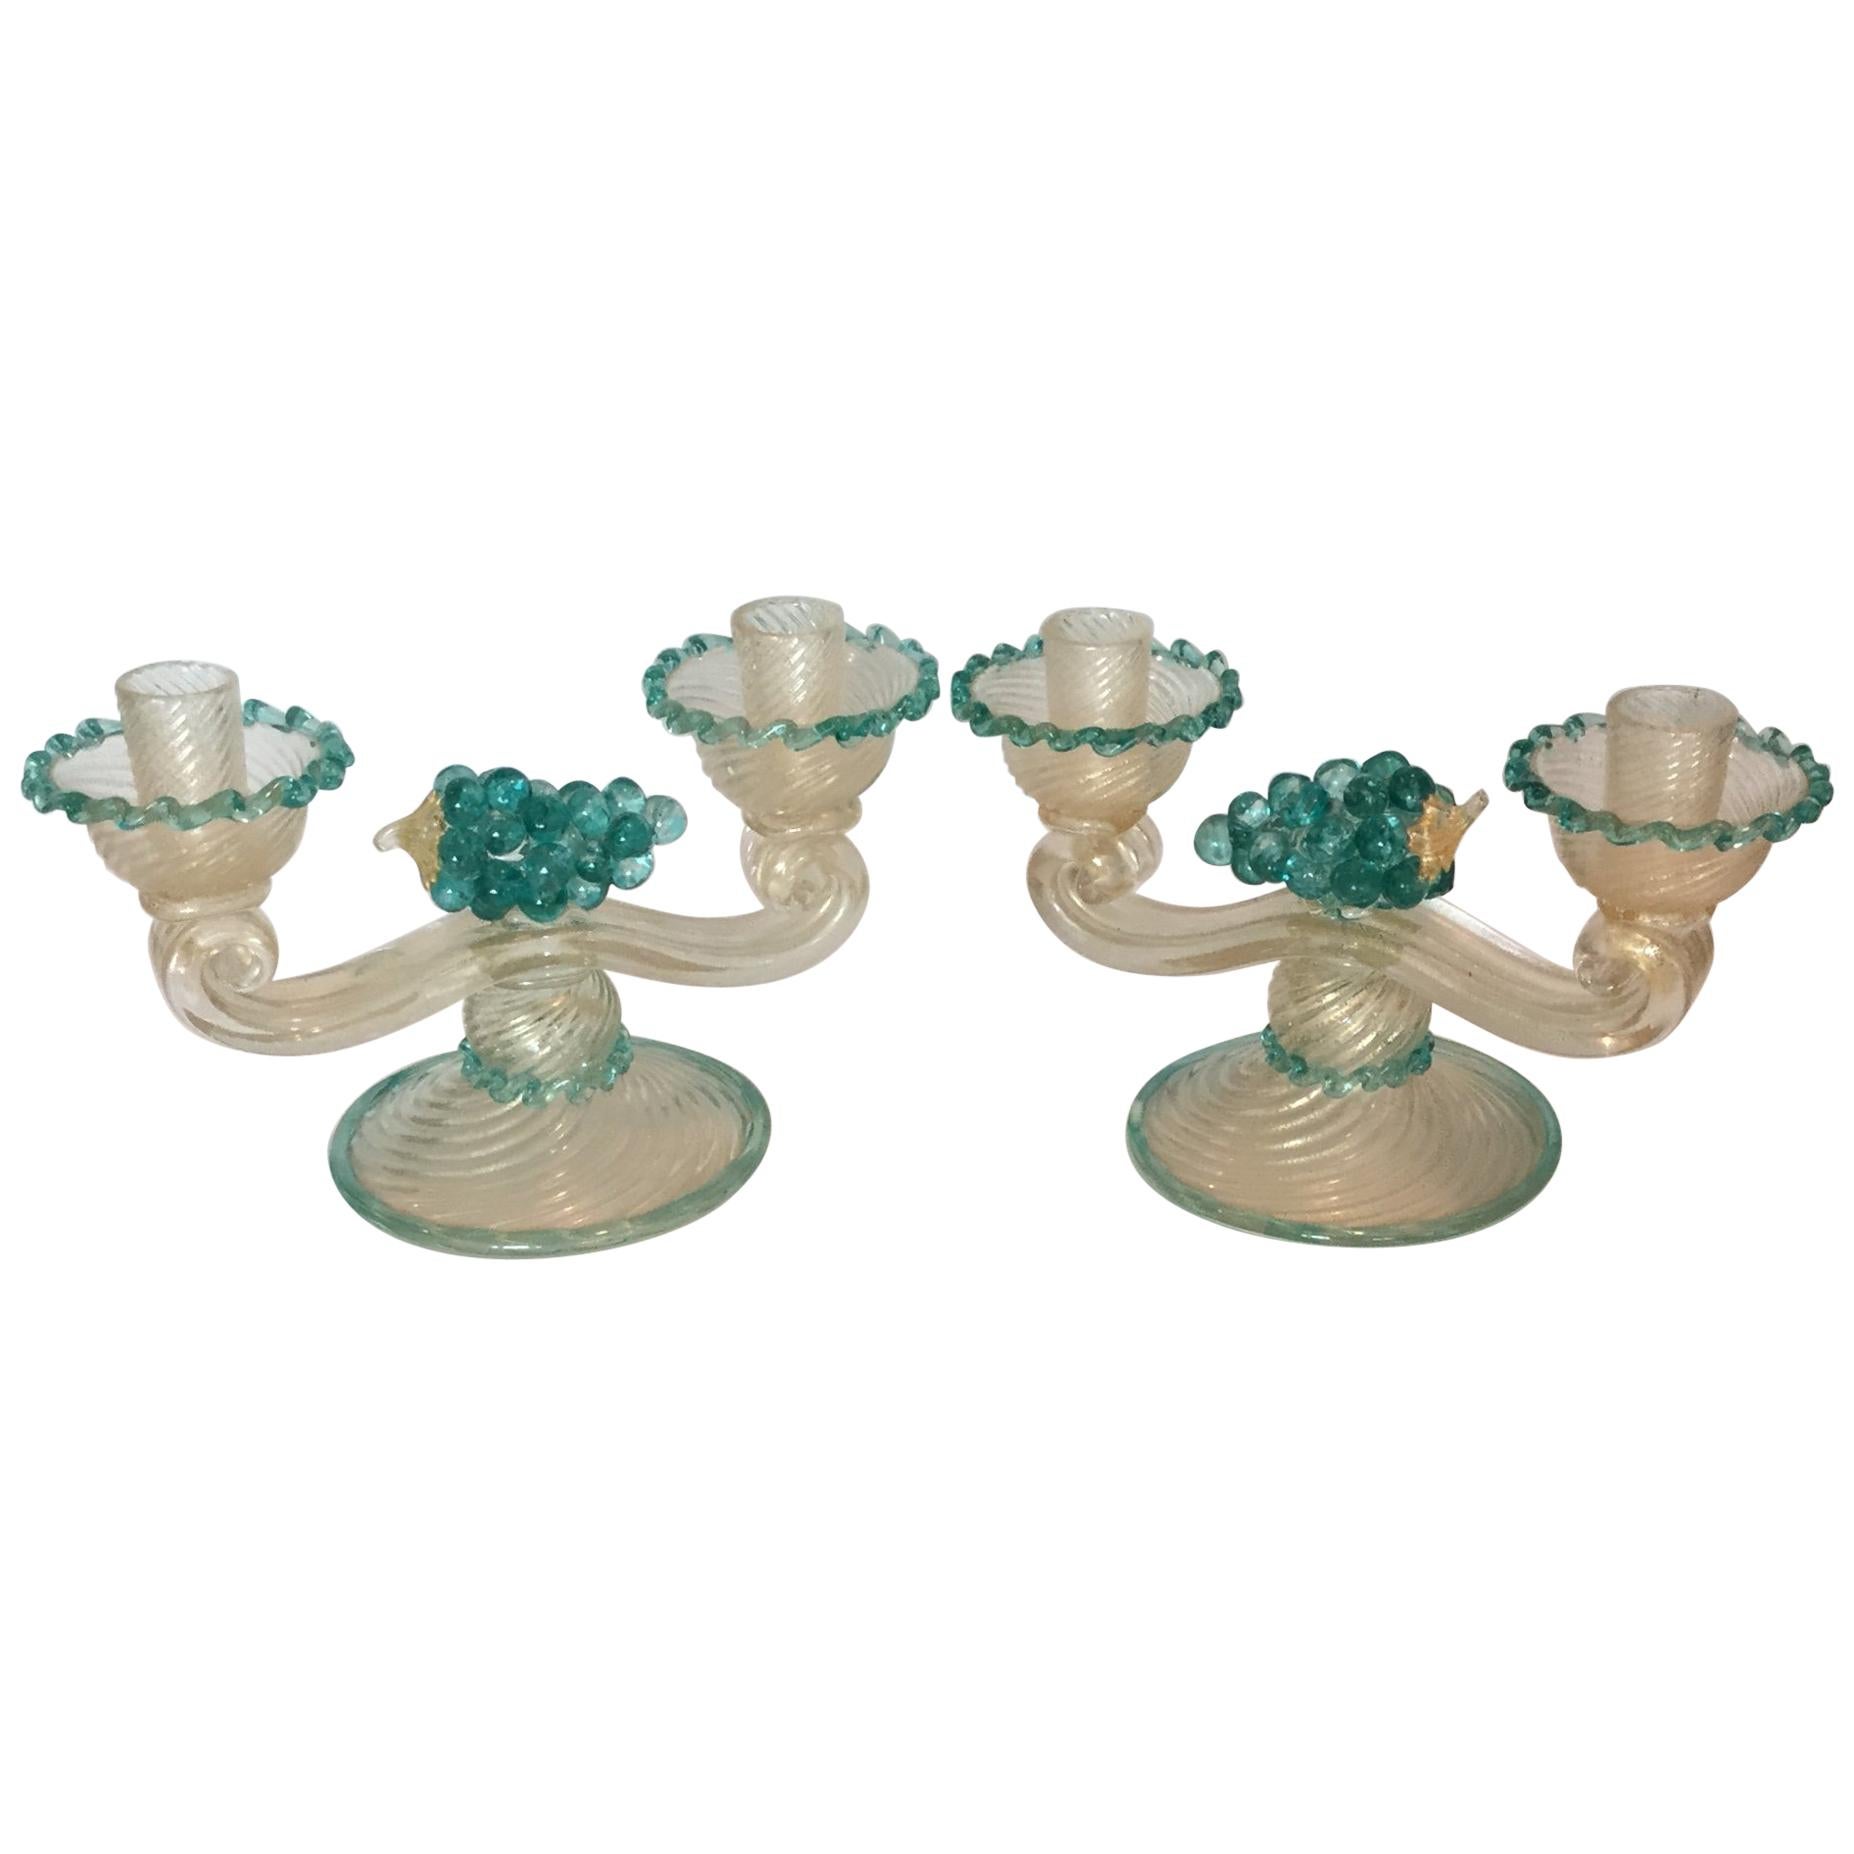 Rare 1930s Ercole Barovier for Barovier and Toso Pair of Candlesticks For Sale